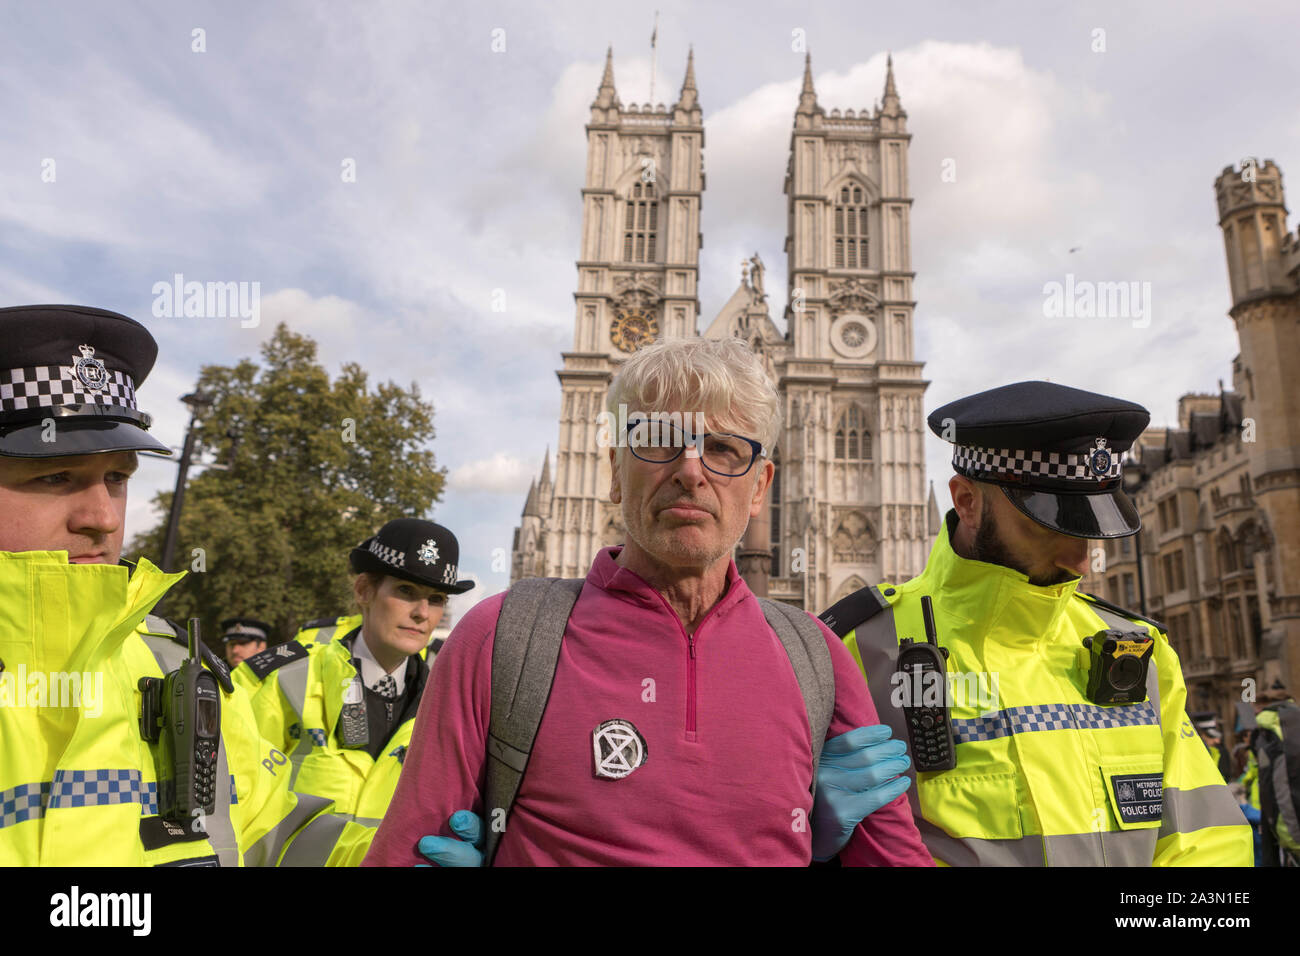 Westminster, London, UK. 9th Oct, 2019. Big police push to clear protesters from the Westminster Abbey area. Many arrests and police confiscate tents and equipment. Penelope Barritt/Alamy Live News Stock Photo